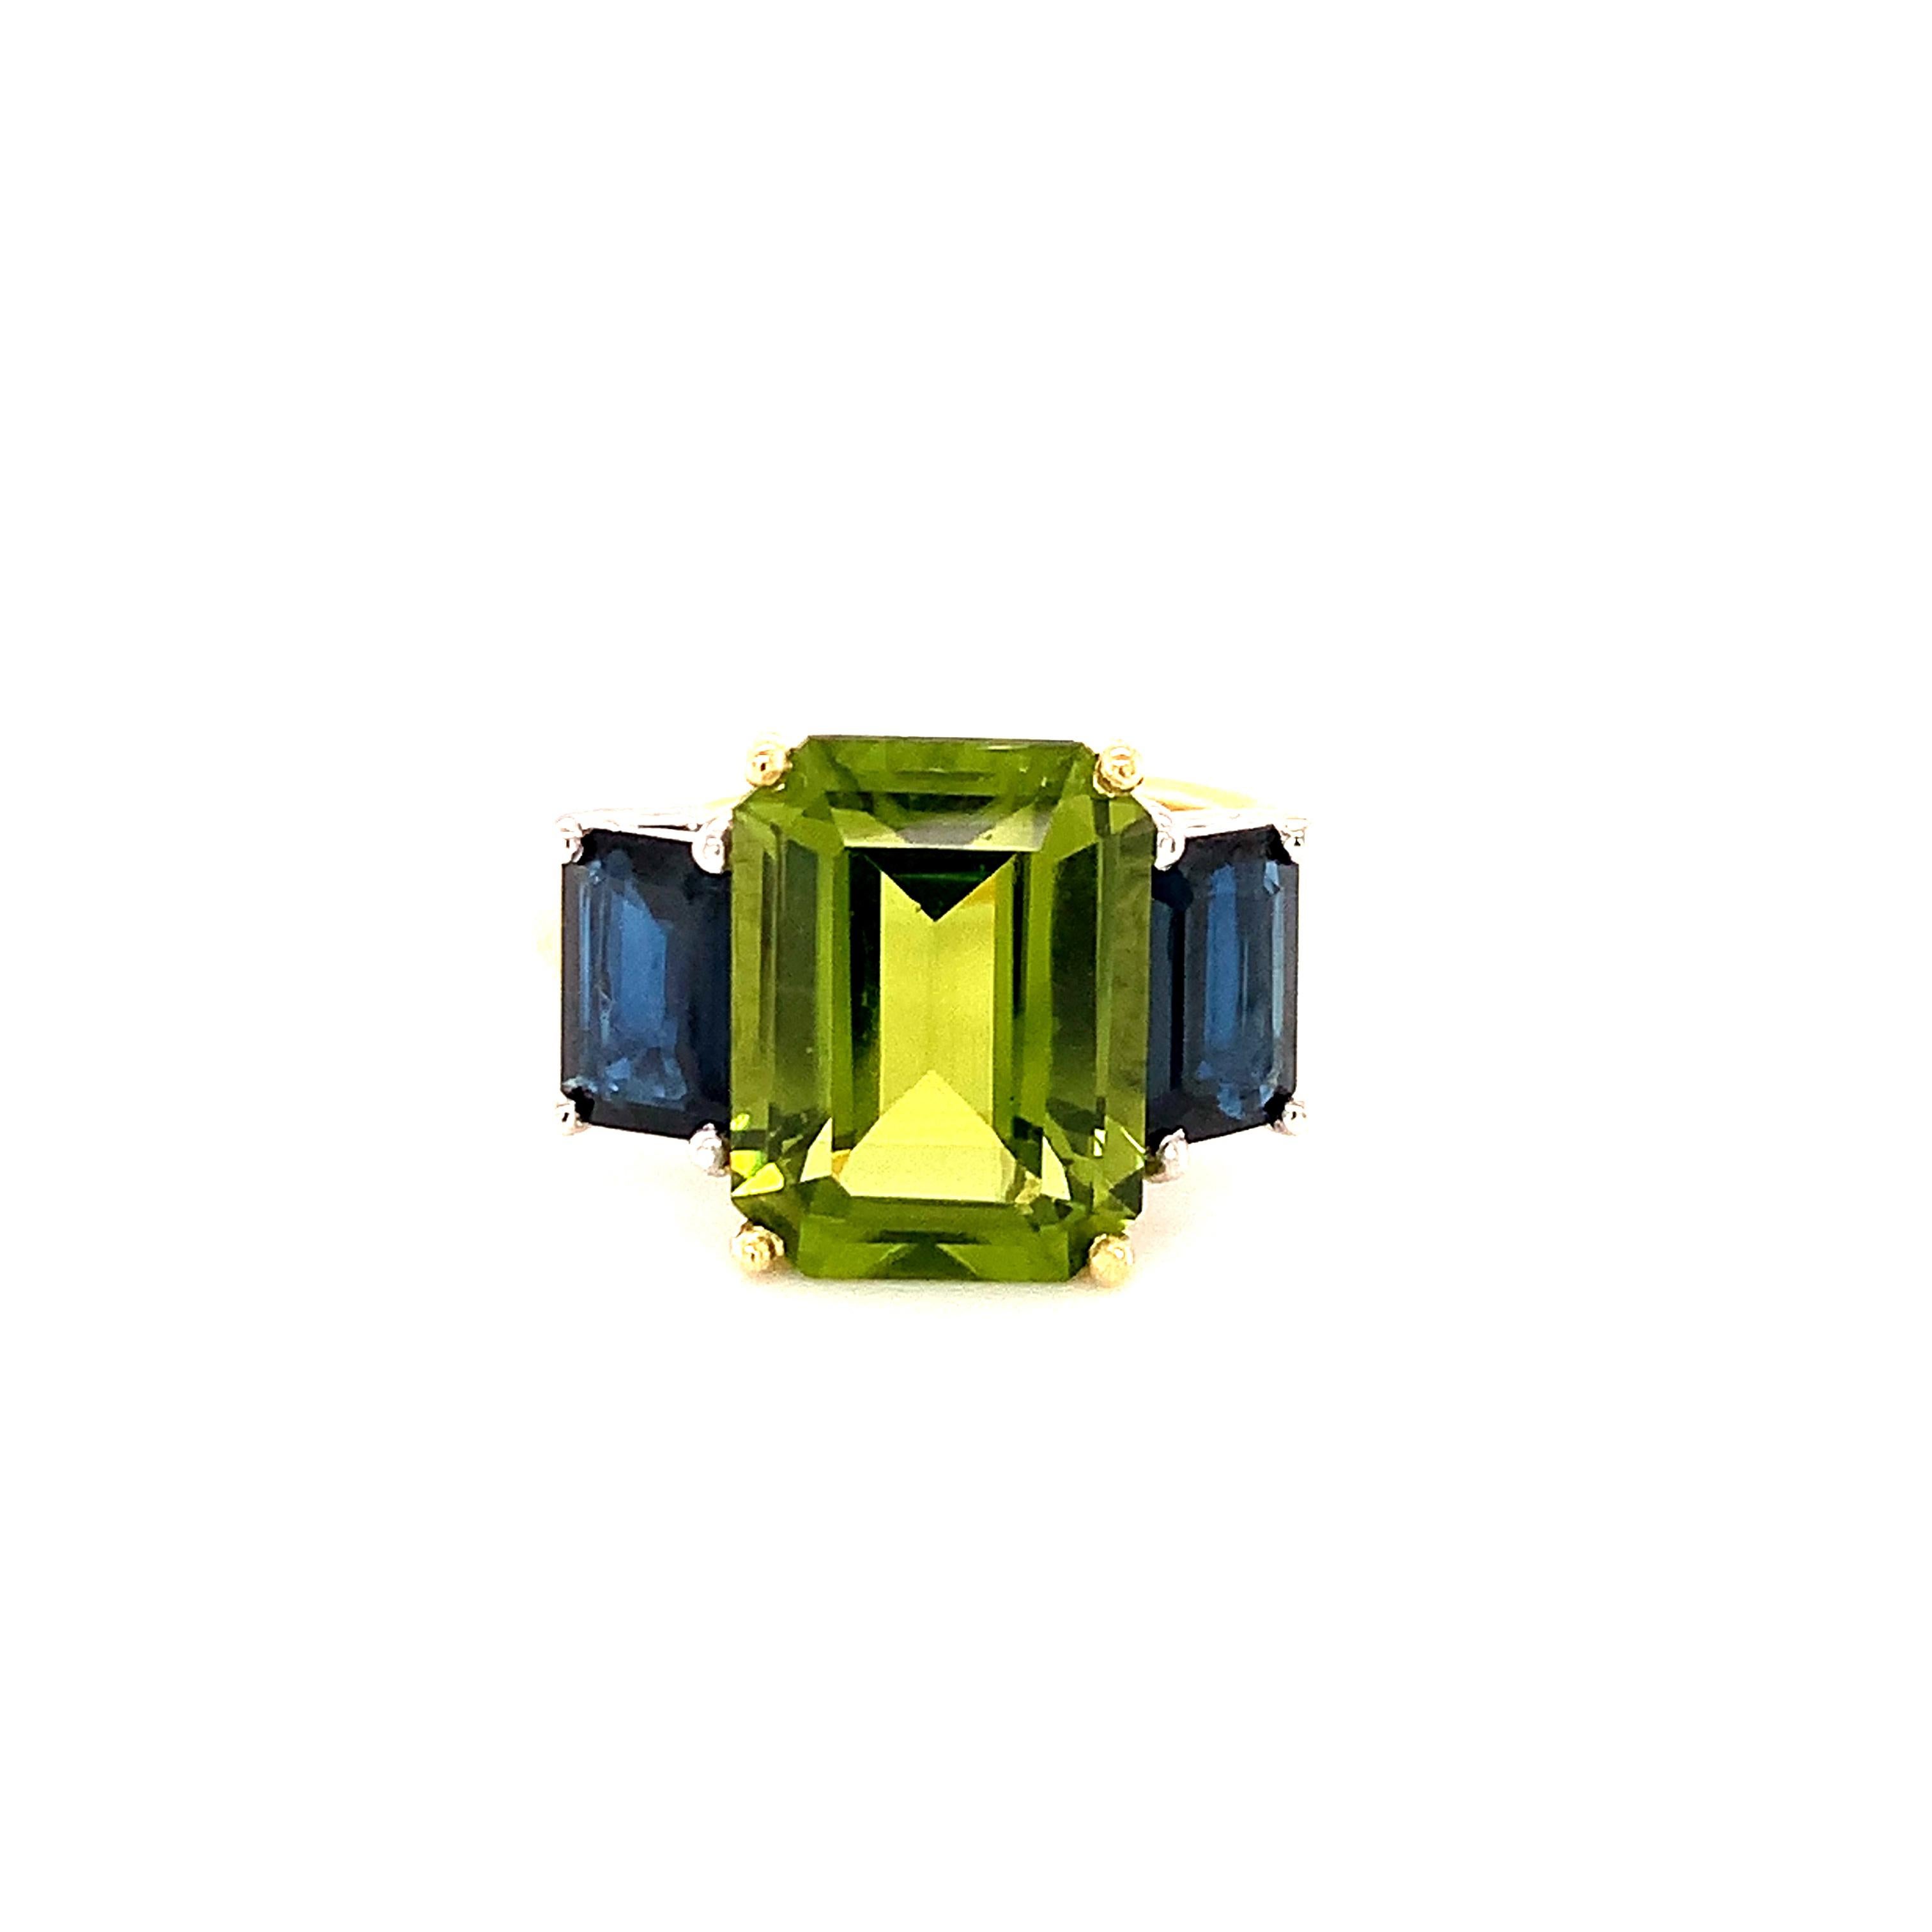 A beautiful pairing of bright colors and sleek shapes form this modern version of a classic 3-stone ring. This stylish ring features a gorgeous, 5.12 carat emerald-cut peridot flanked on either side by emerald-cut rich blue sapphires. The peridot